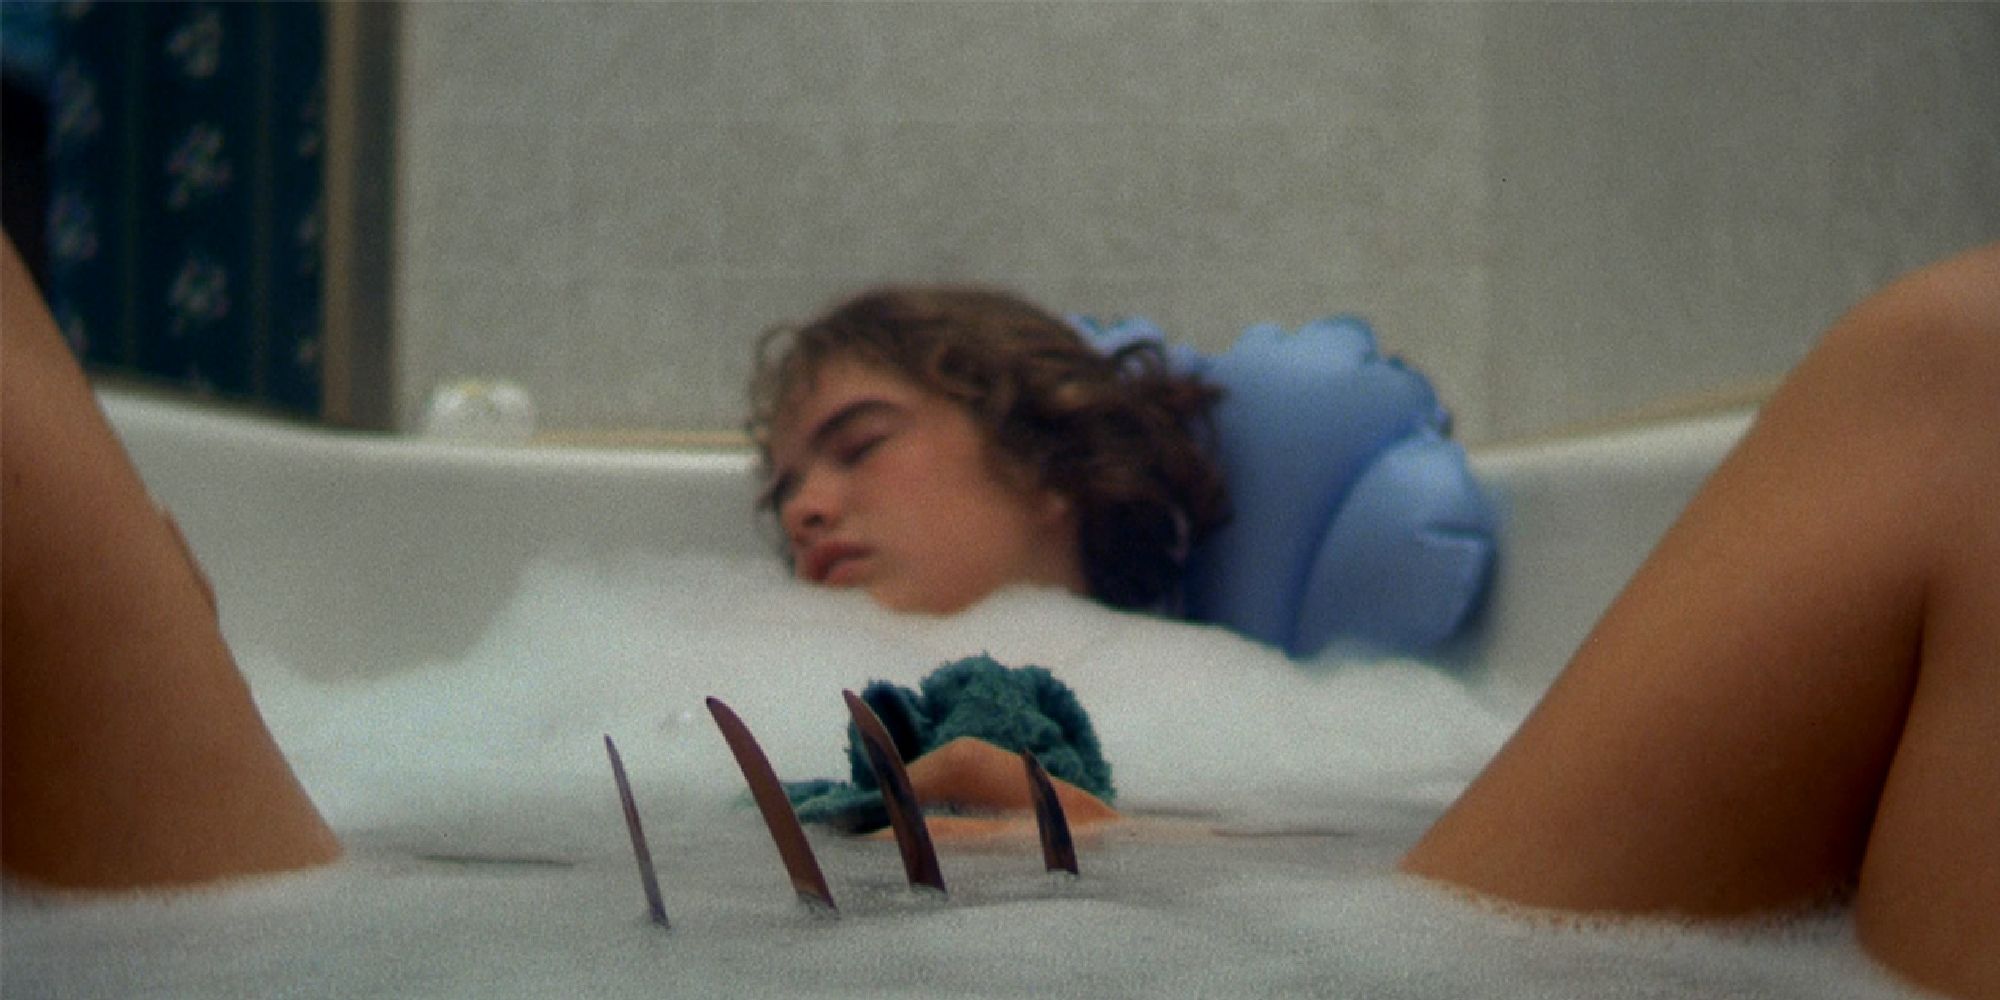 Freddy Krueger's claws about to attack Heather Langenkamp's character in the bath in 'Nightmare on Elm Street'